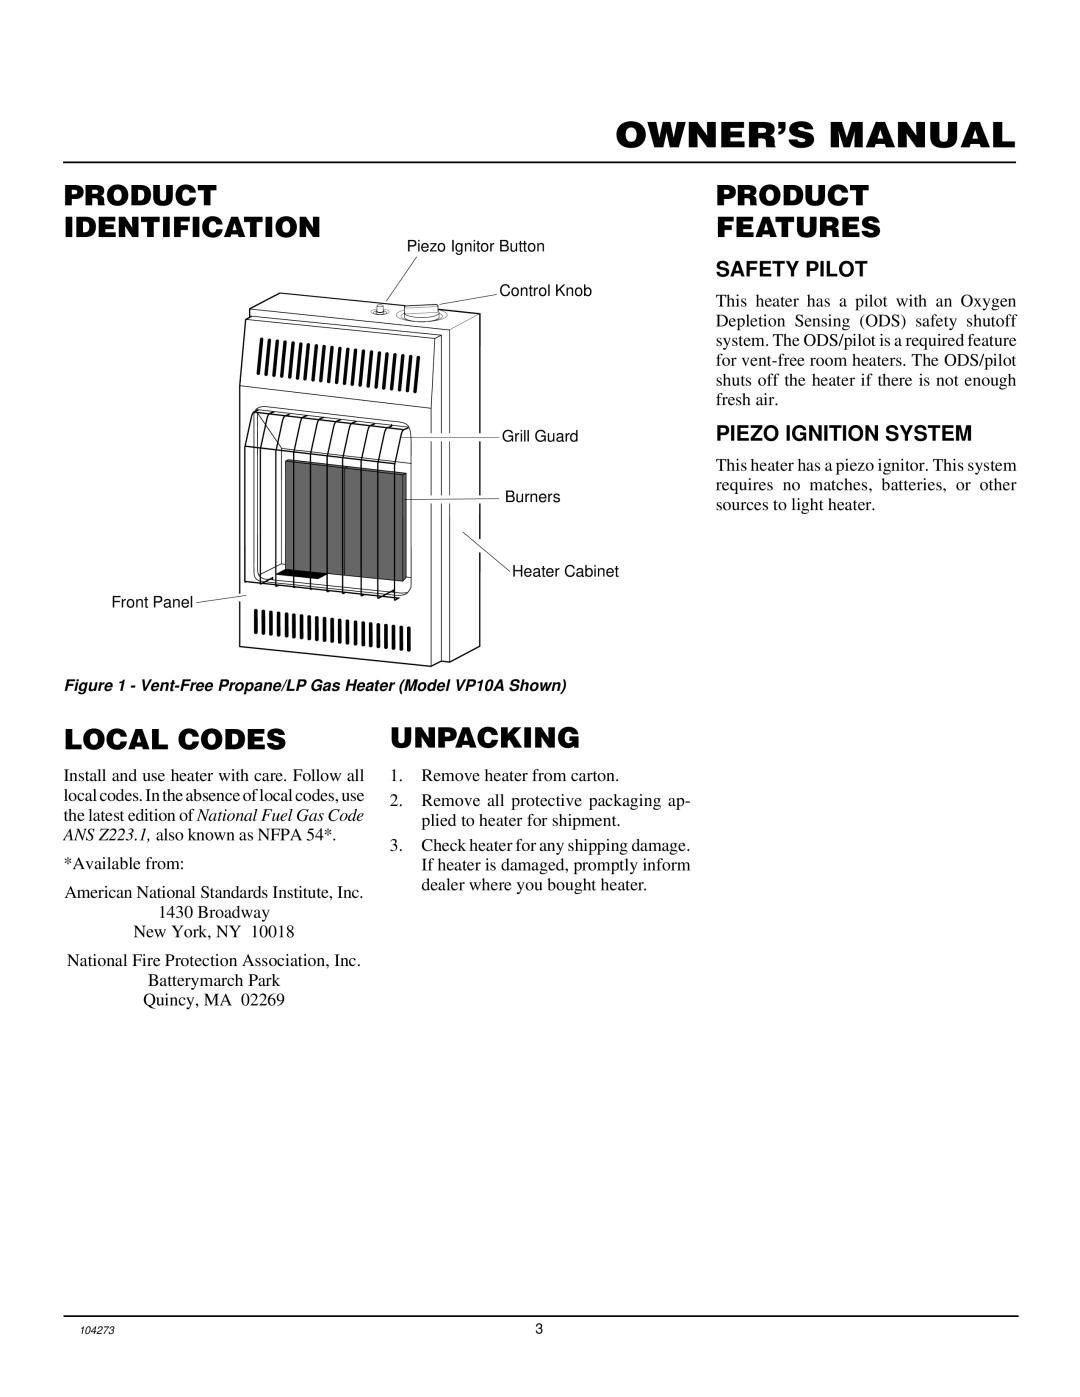 Desa VP5D installation manual Product Identification, Product Features, Local Codes, Unpacking 